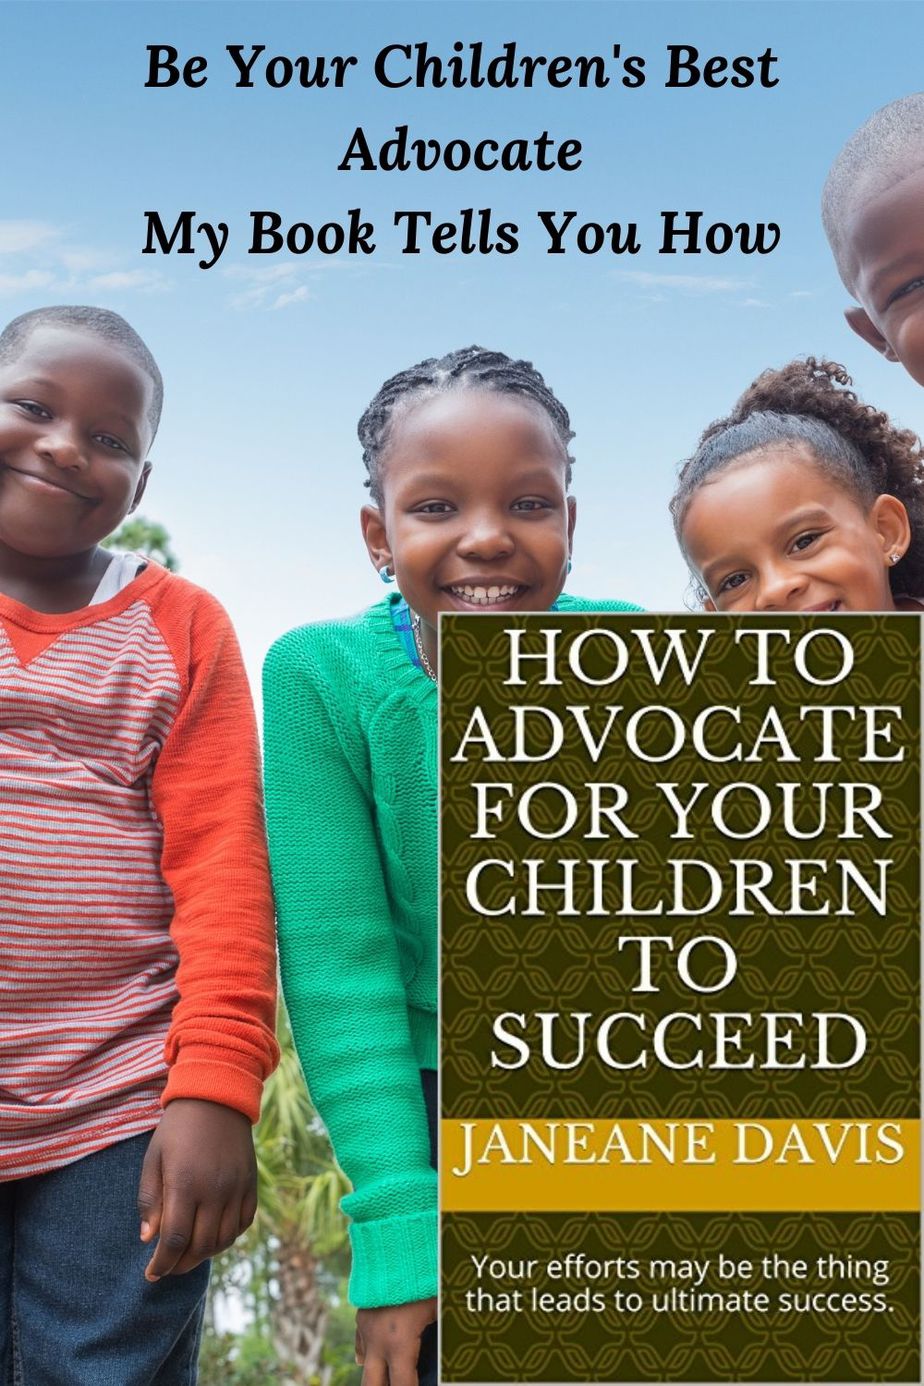 Photo of 4 smiling African American Children, copy of the book cover "How to Advocate for Your Children to Succeed"